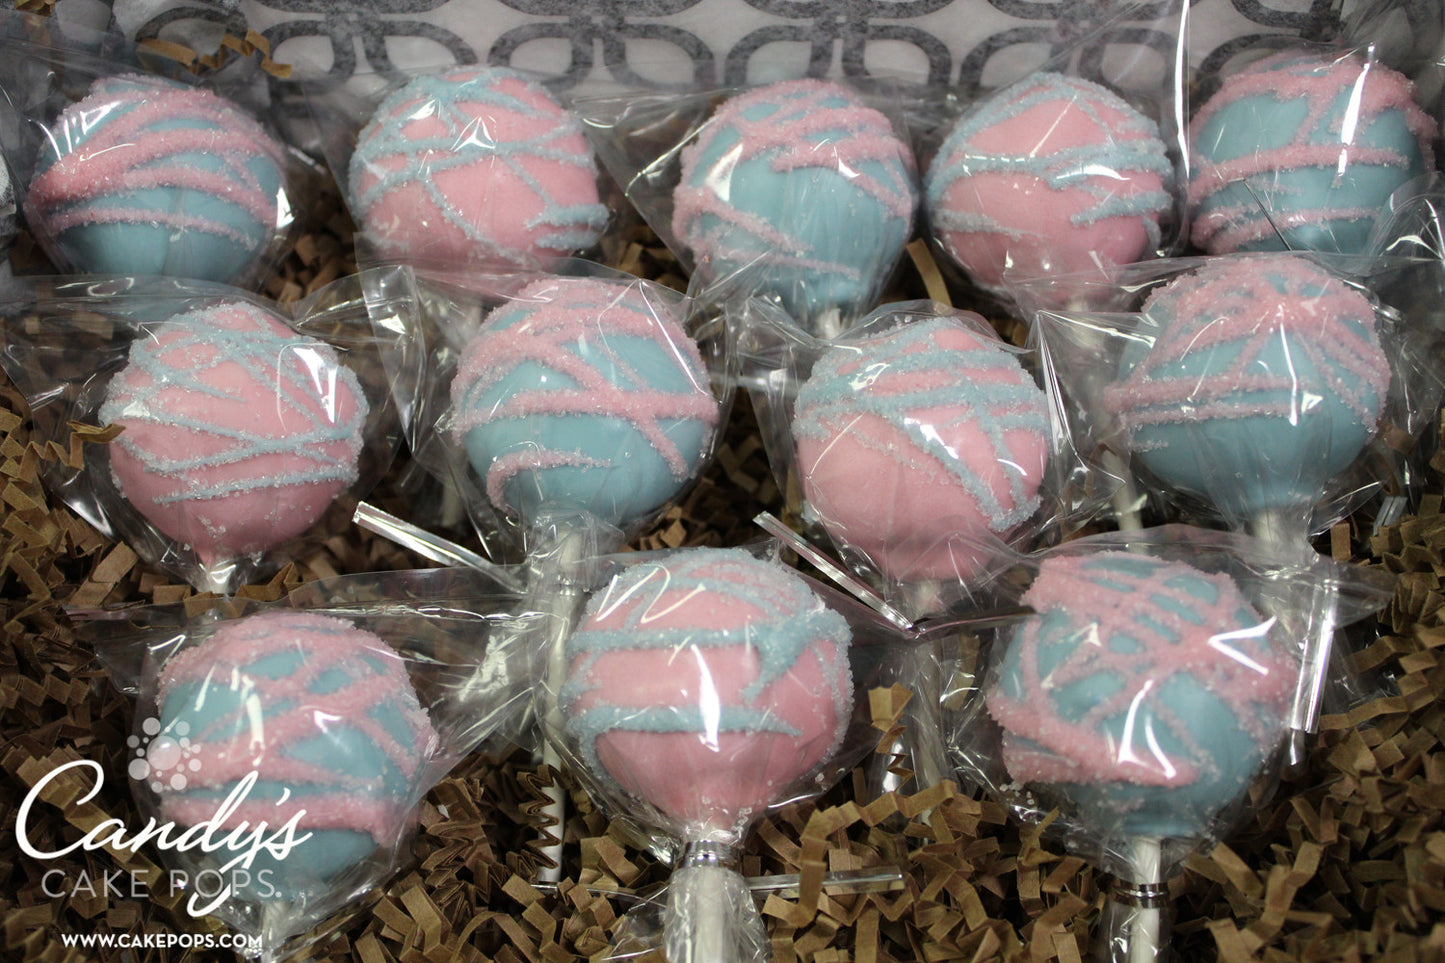 Gender Reveal Cake Pops (Vanilla Cake dyed either pink or blue inside or not sure yet) - Candy's Cake Pops